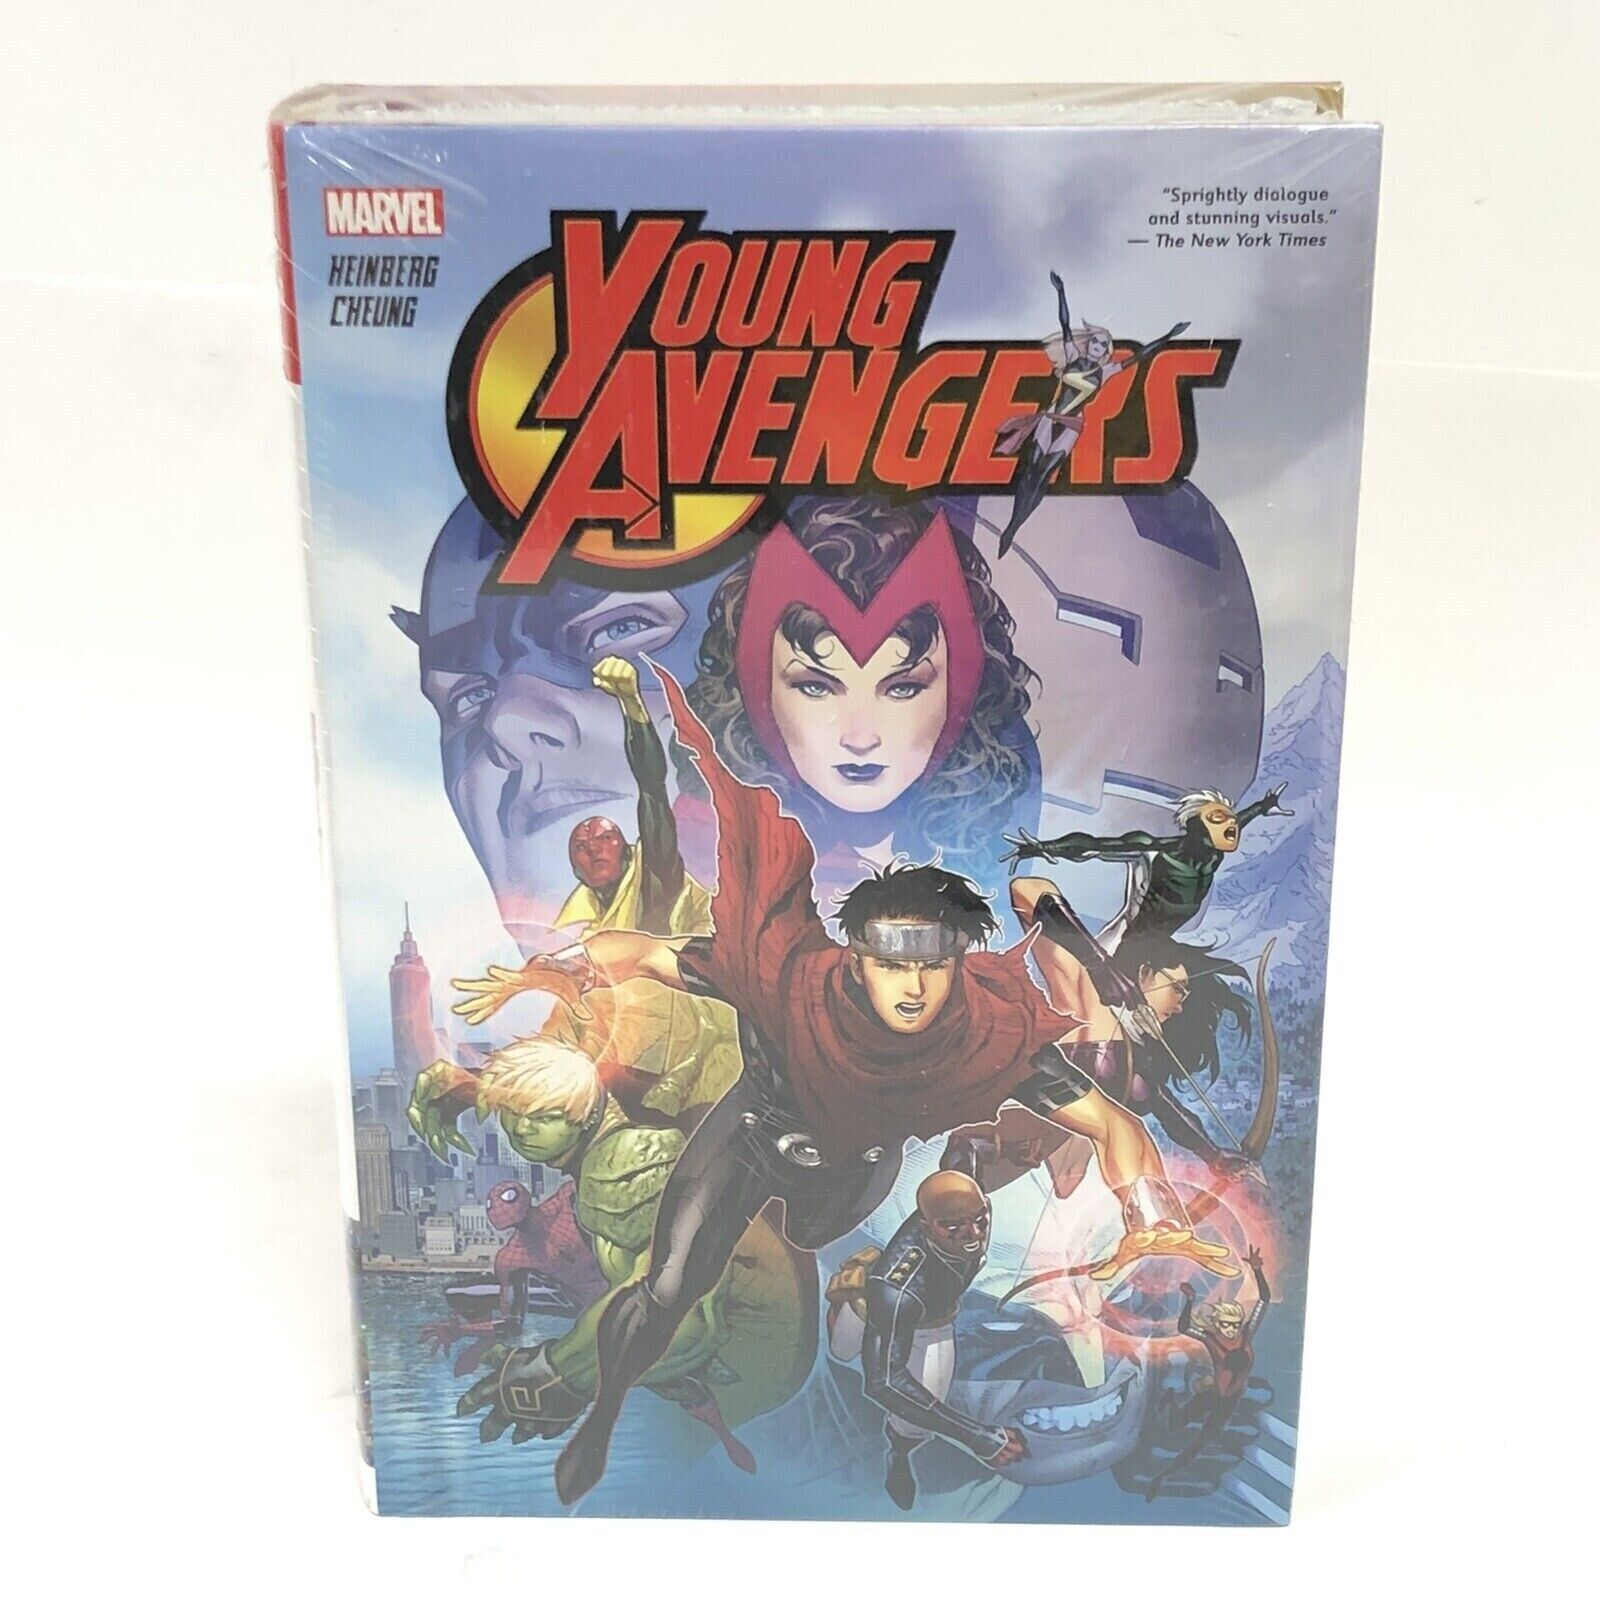 Young Avengers by Heinberg & Cheung Omnibus New Marvel Comics Hardcover Sealed